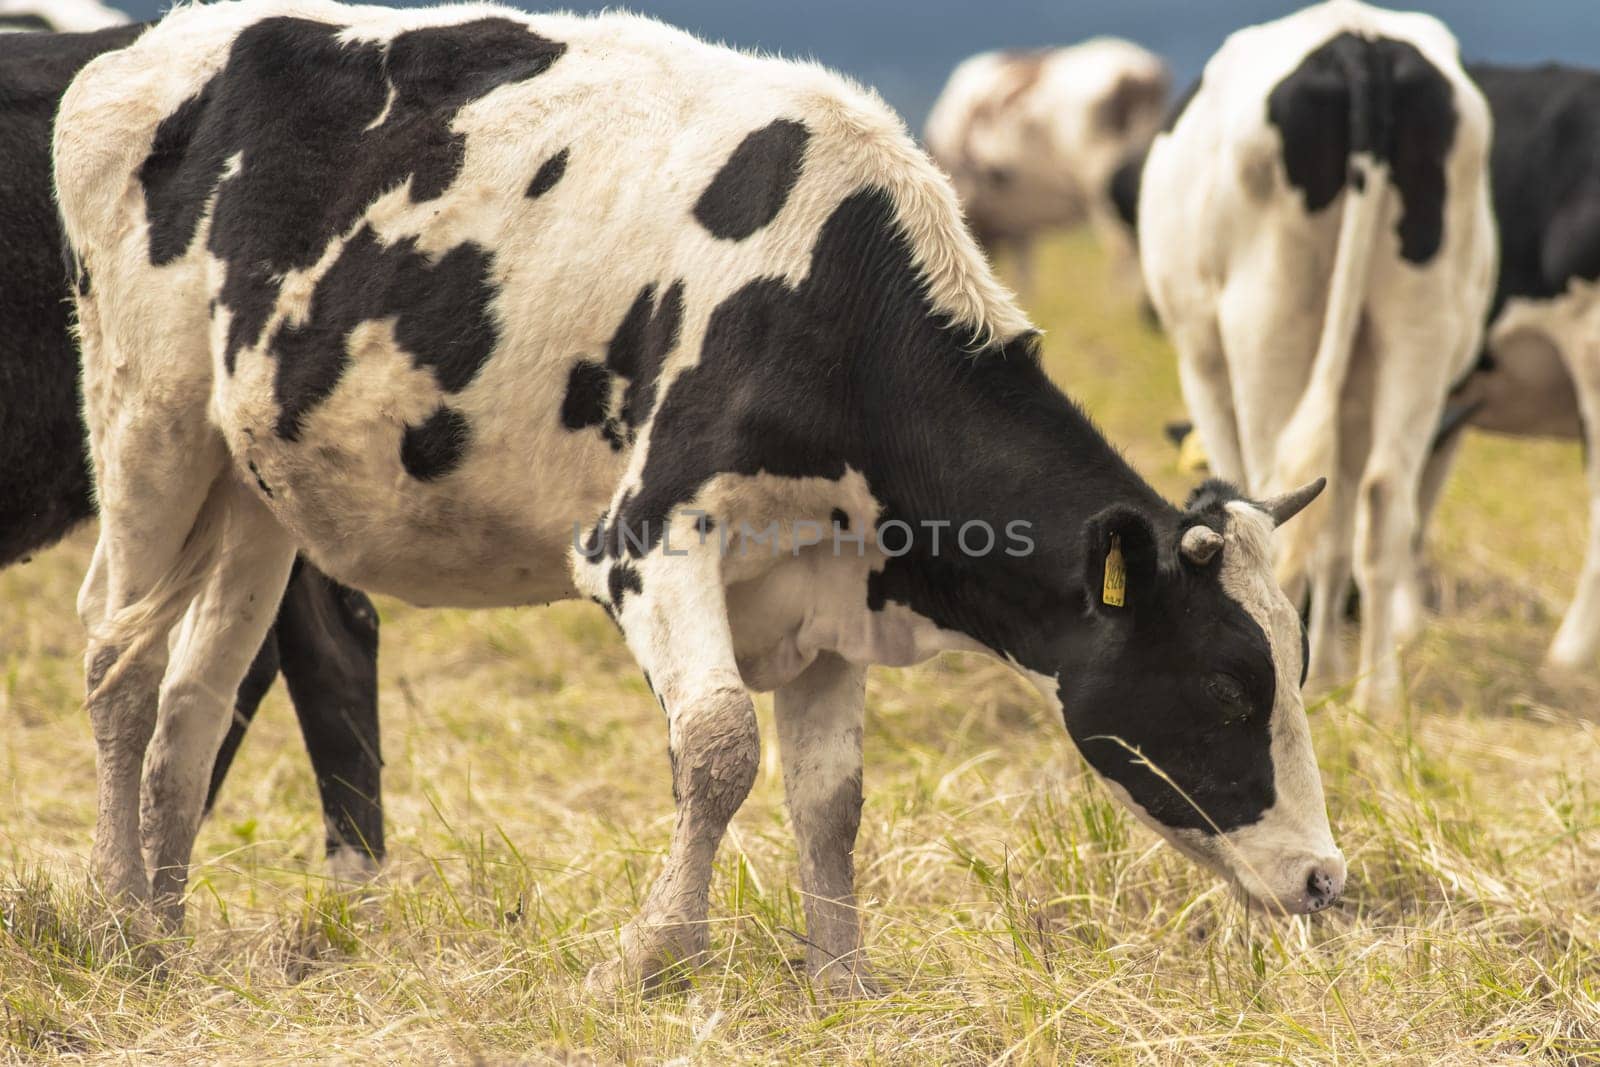 A herd of cows grazing on a dry grass field